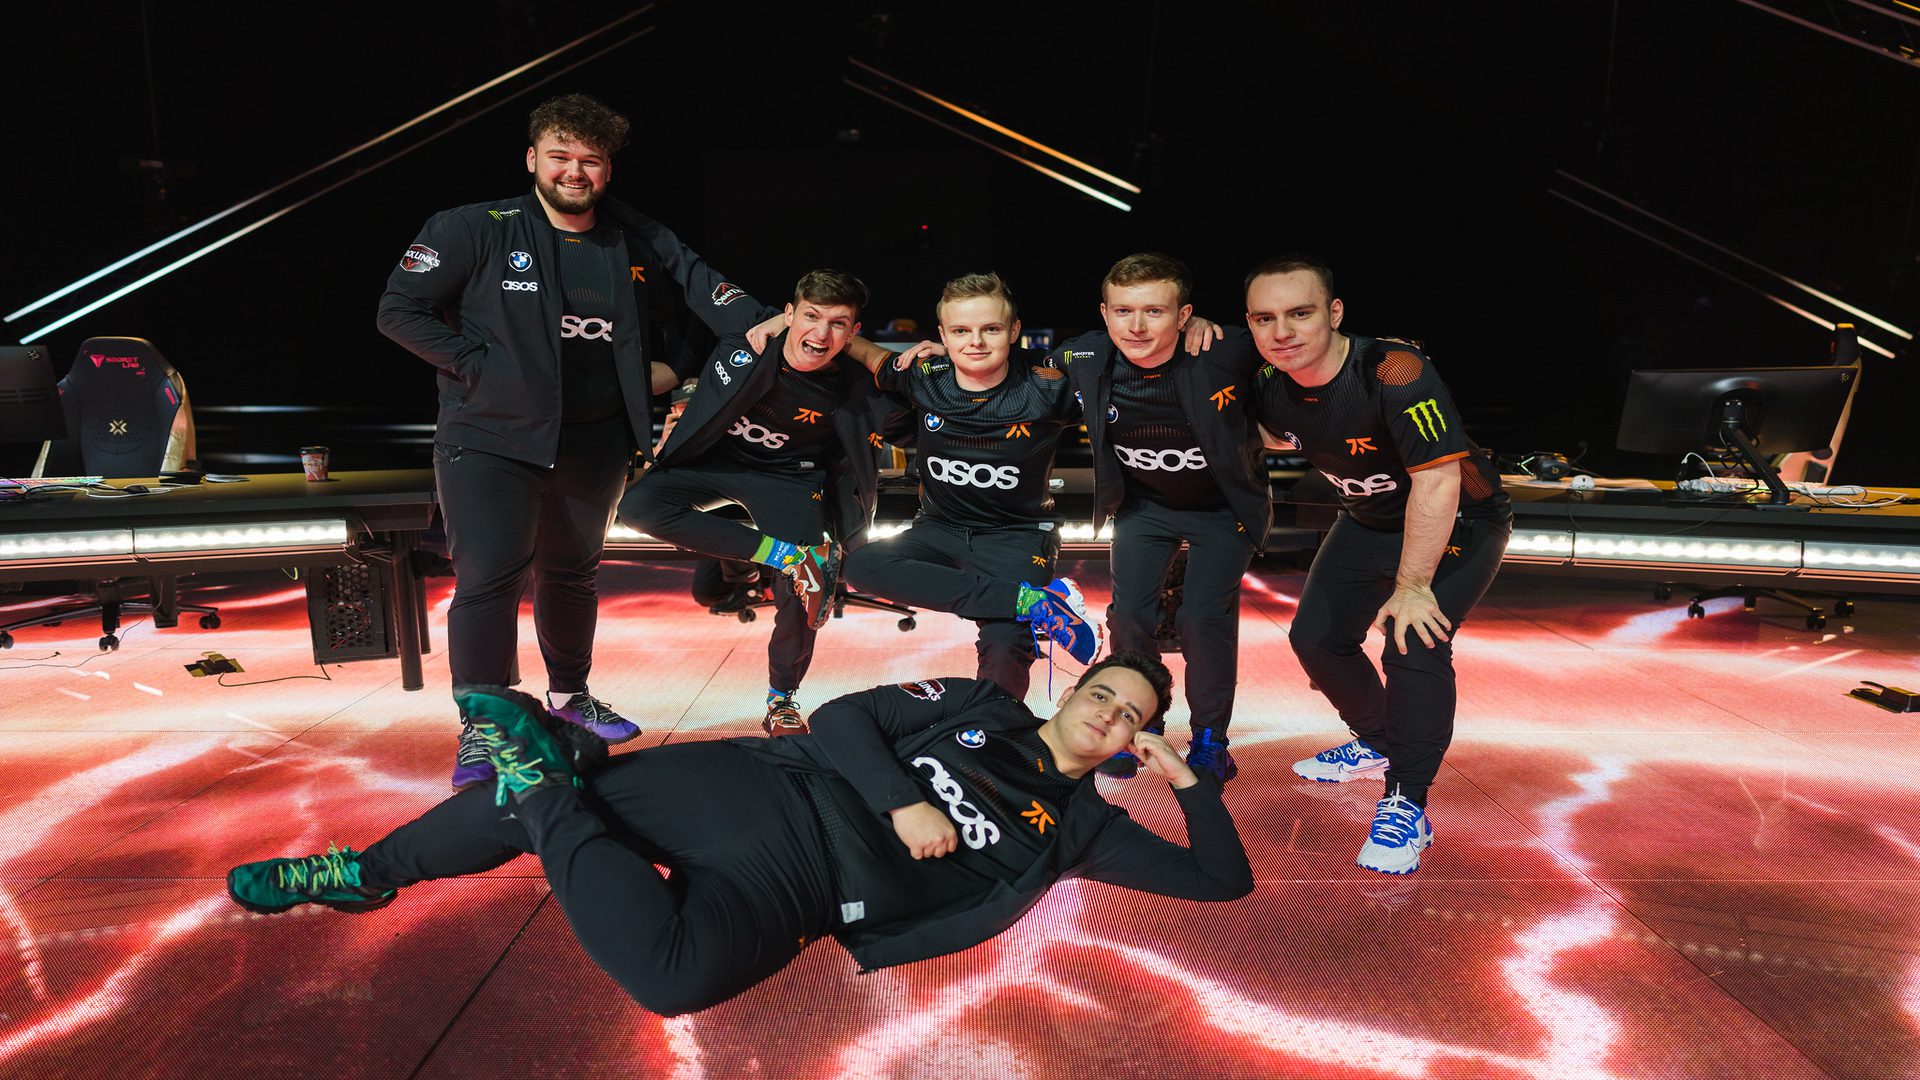 eam Fnatic poses after a win at the VALORANT Champions Groups Stage on December 3 in their black VCT Champions jerseys